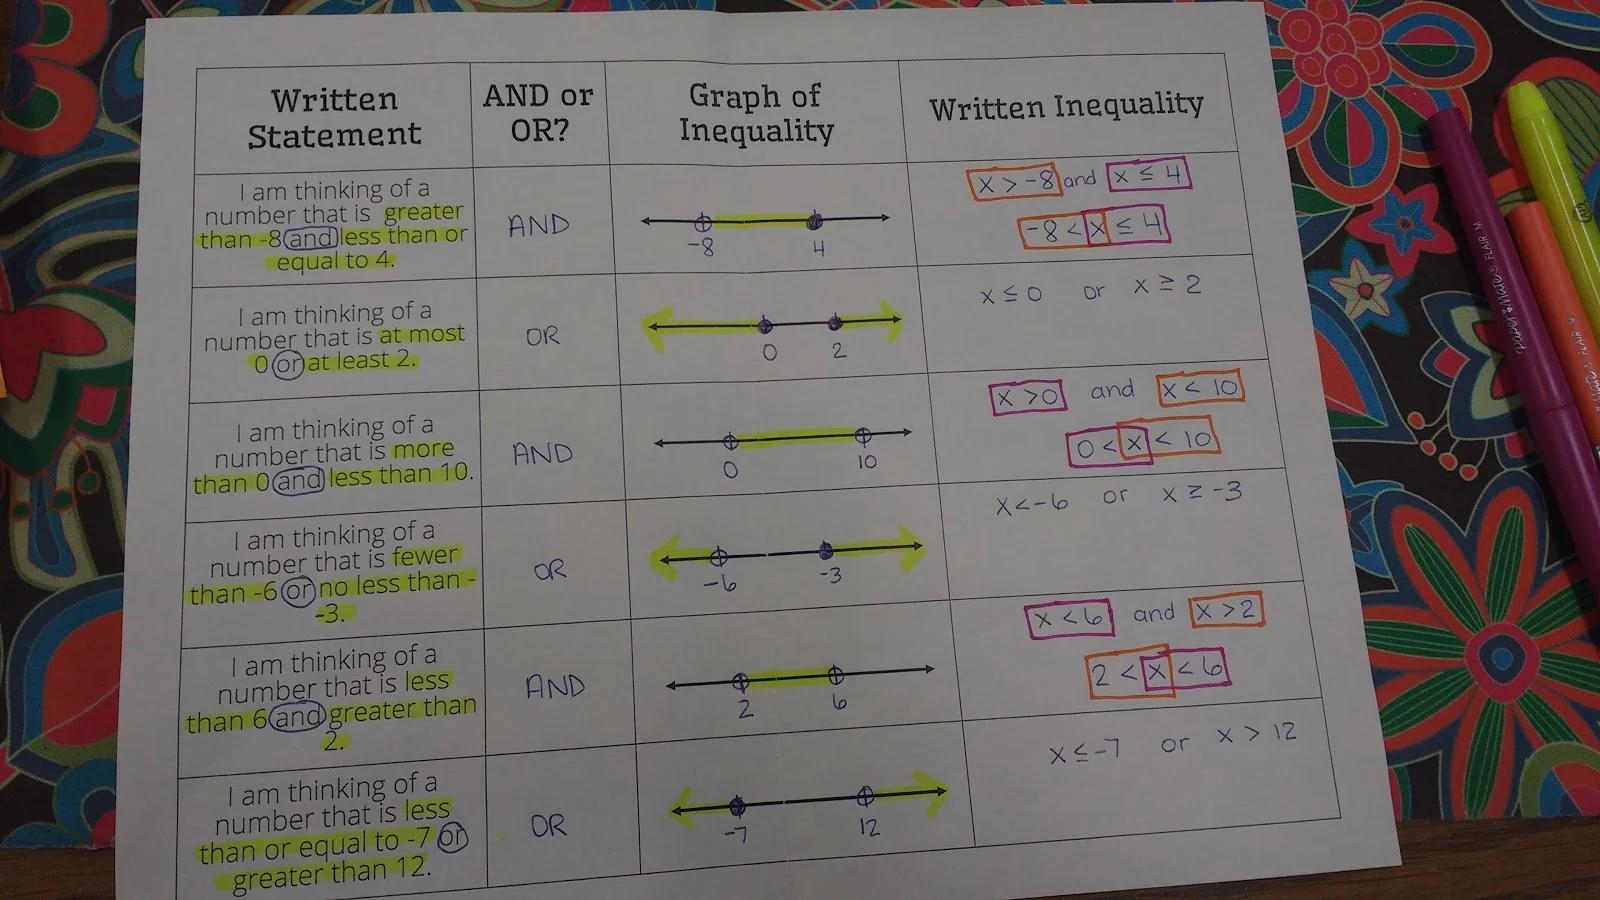 Compound Inequalities Foldable